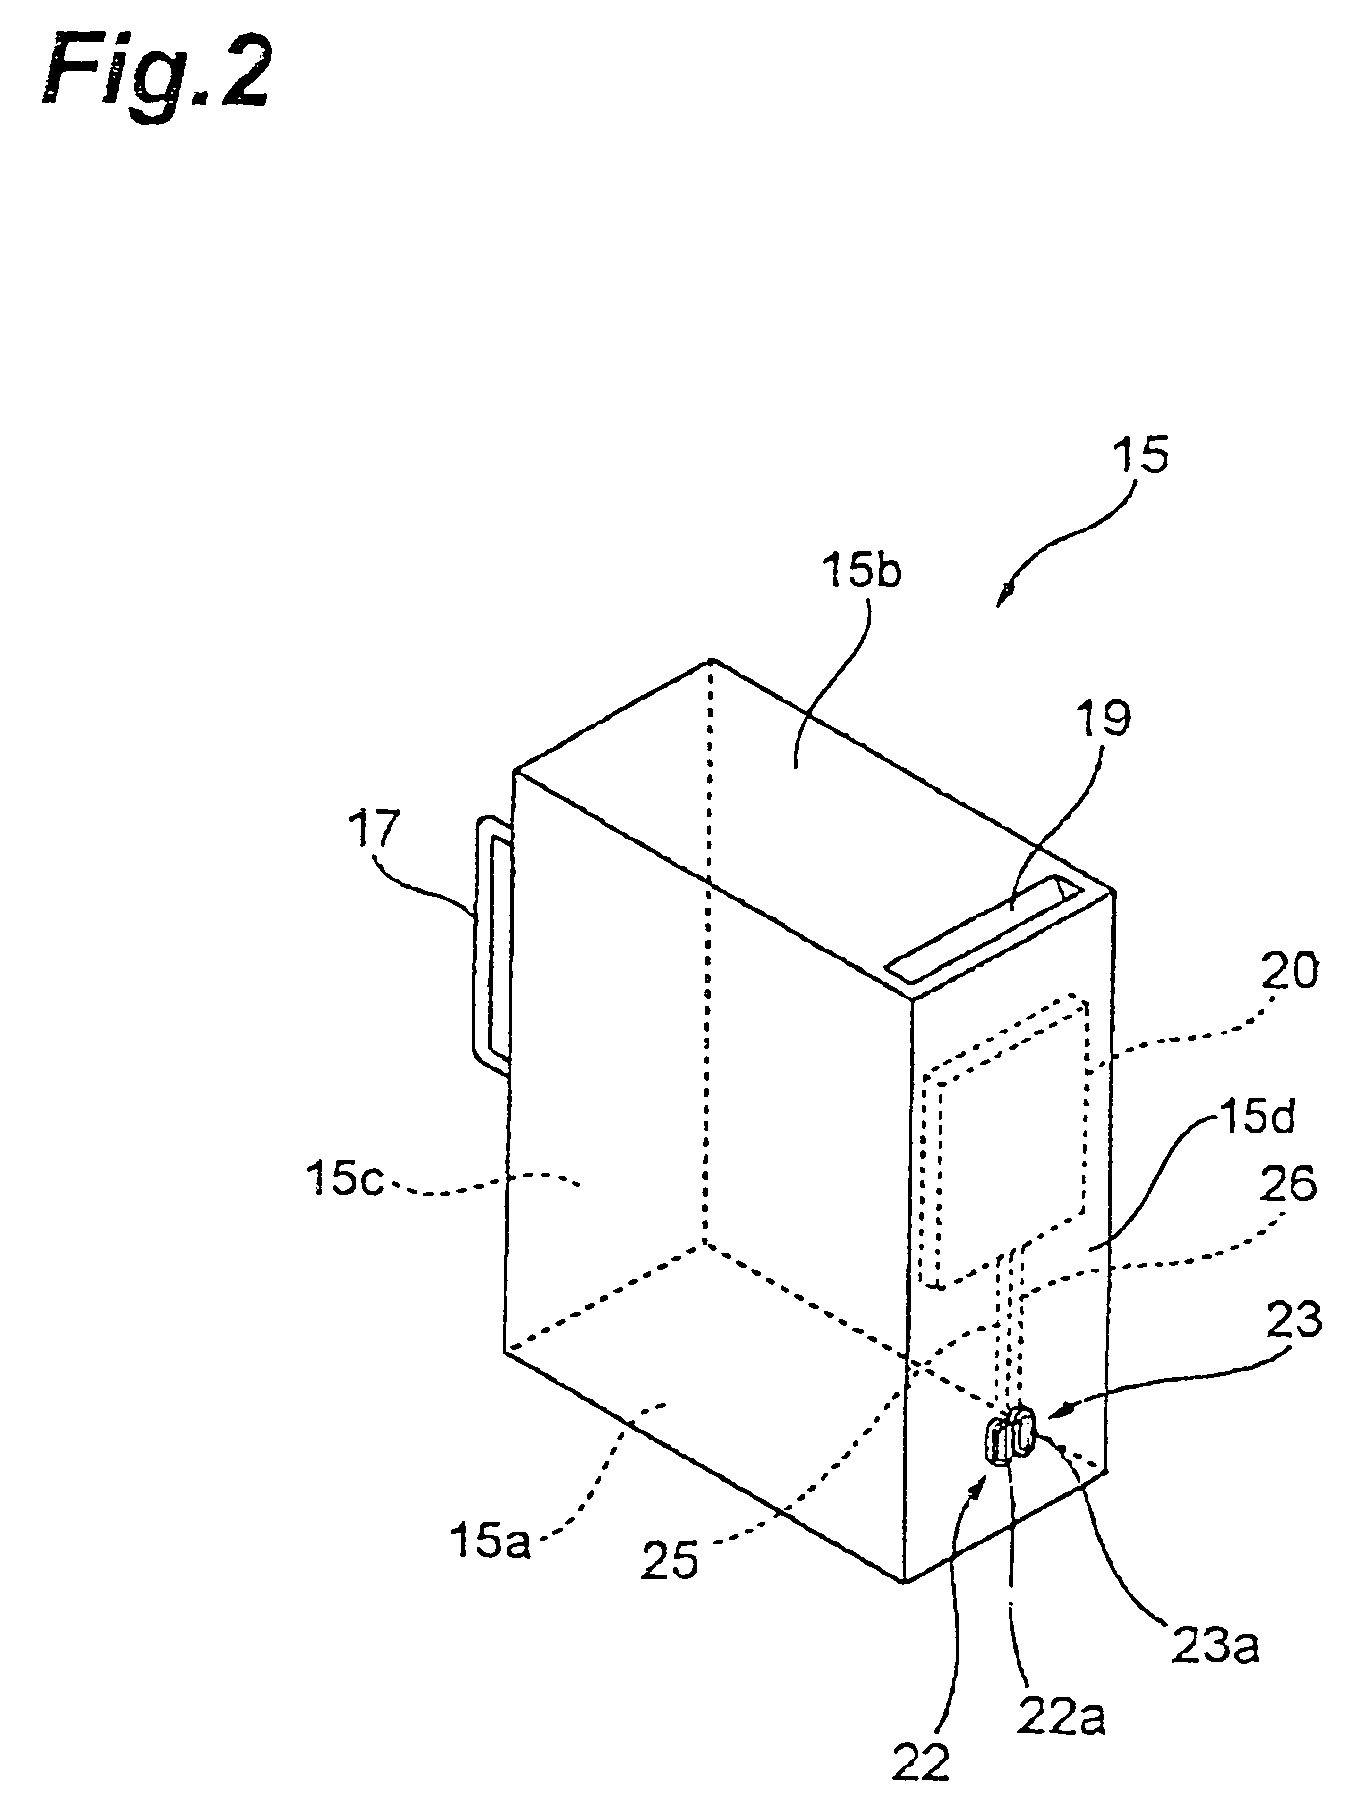 Connecting/holding machine of cash container and connecting/holding unit of cash container